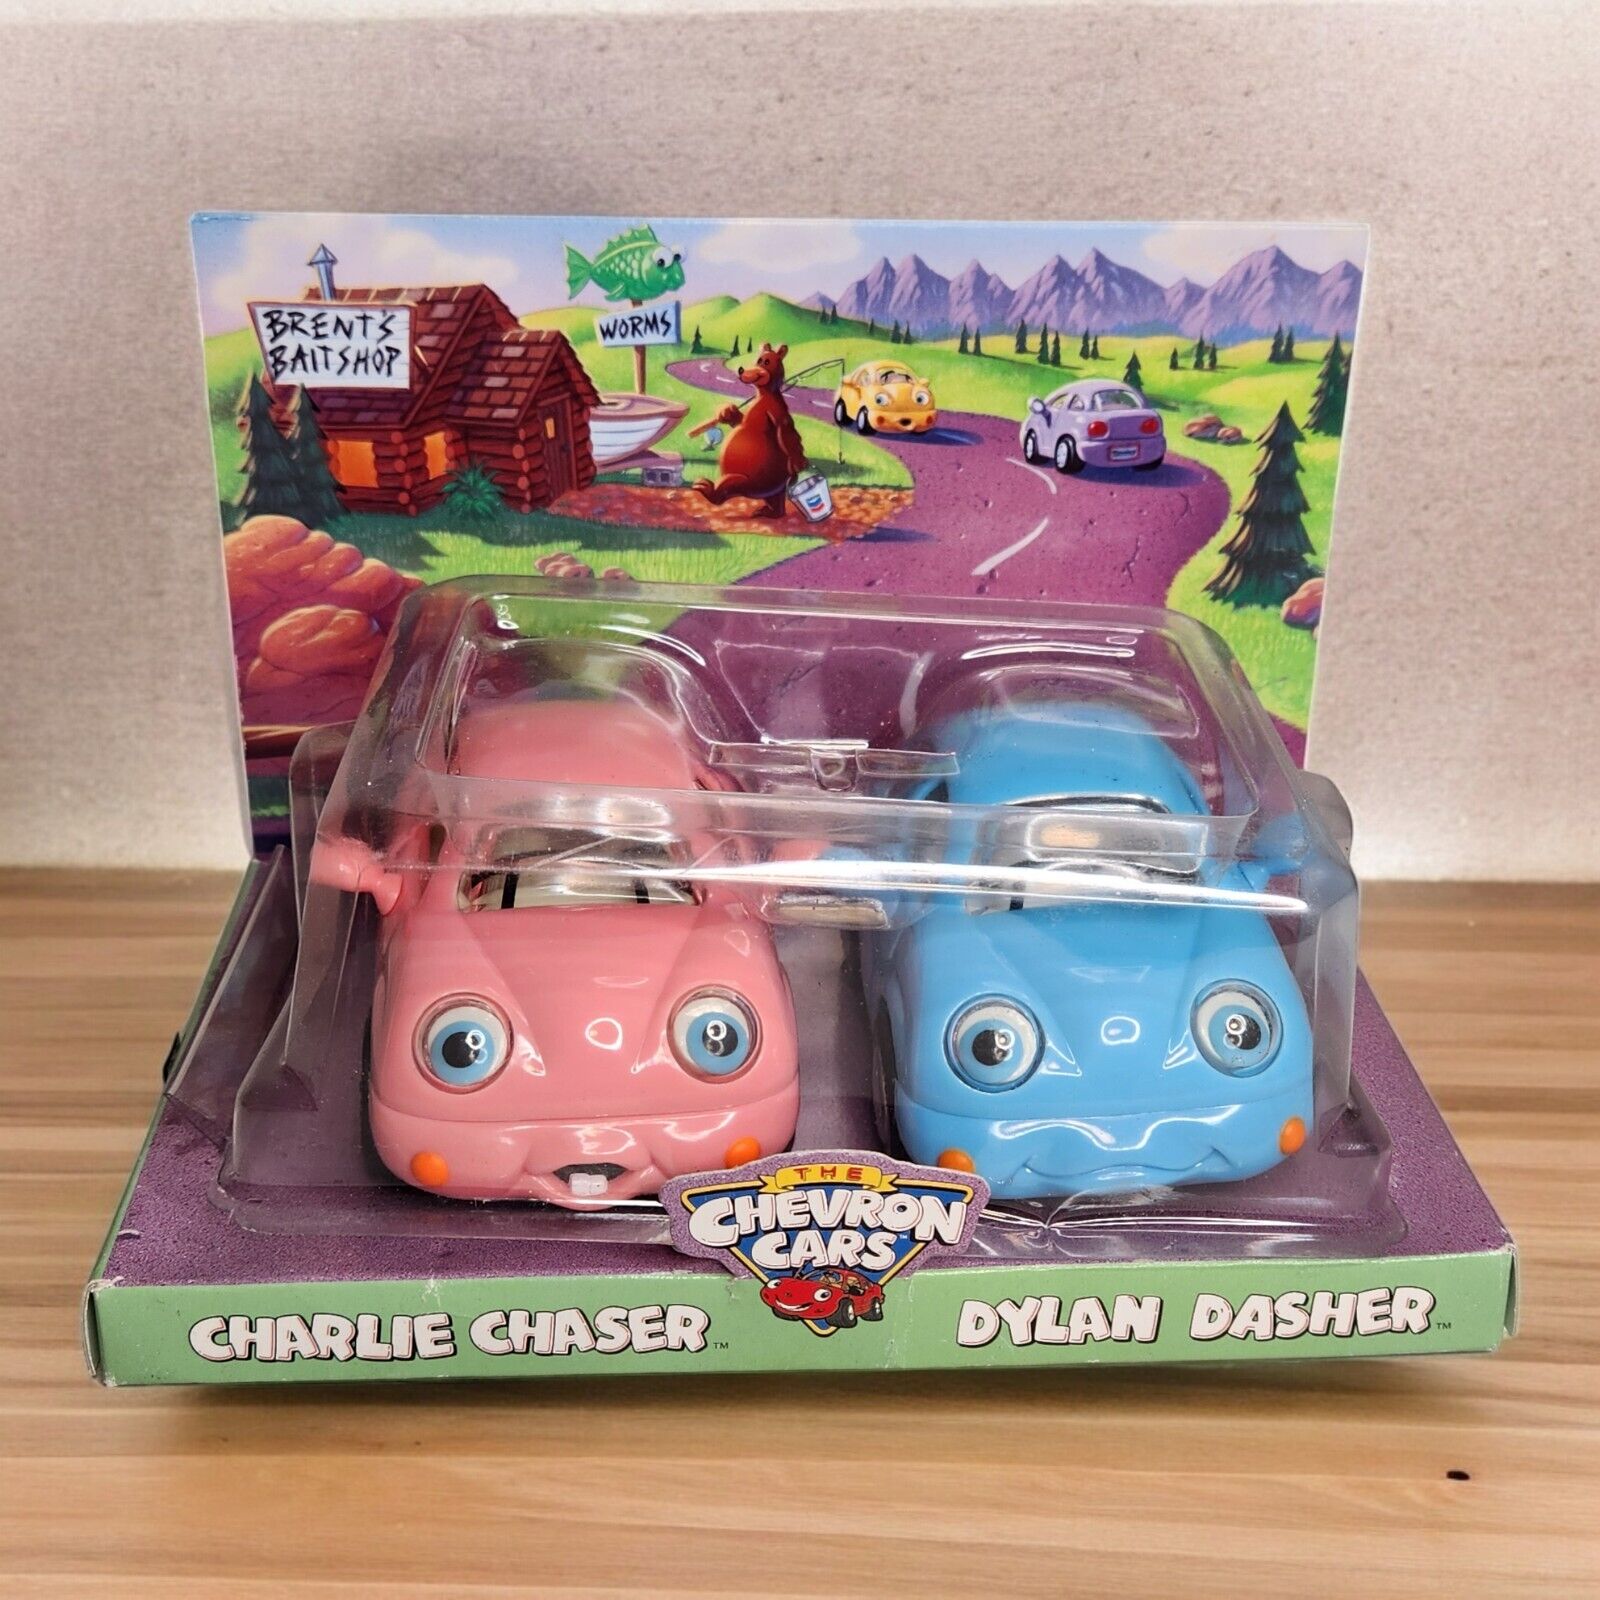 Charlie Chaser & Dylan Dasher - The Chevron Cars - Vintage, New In Box